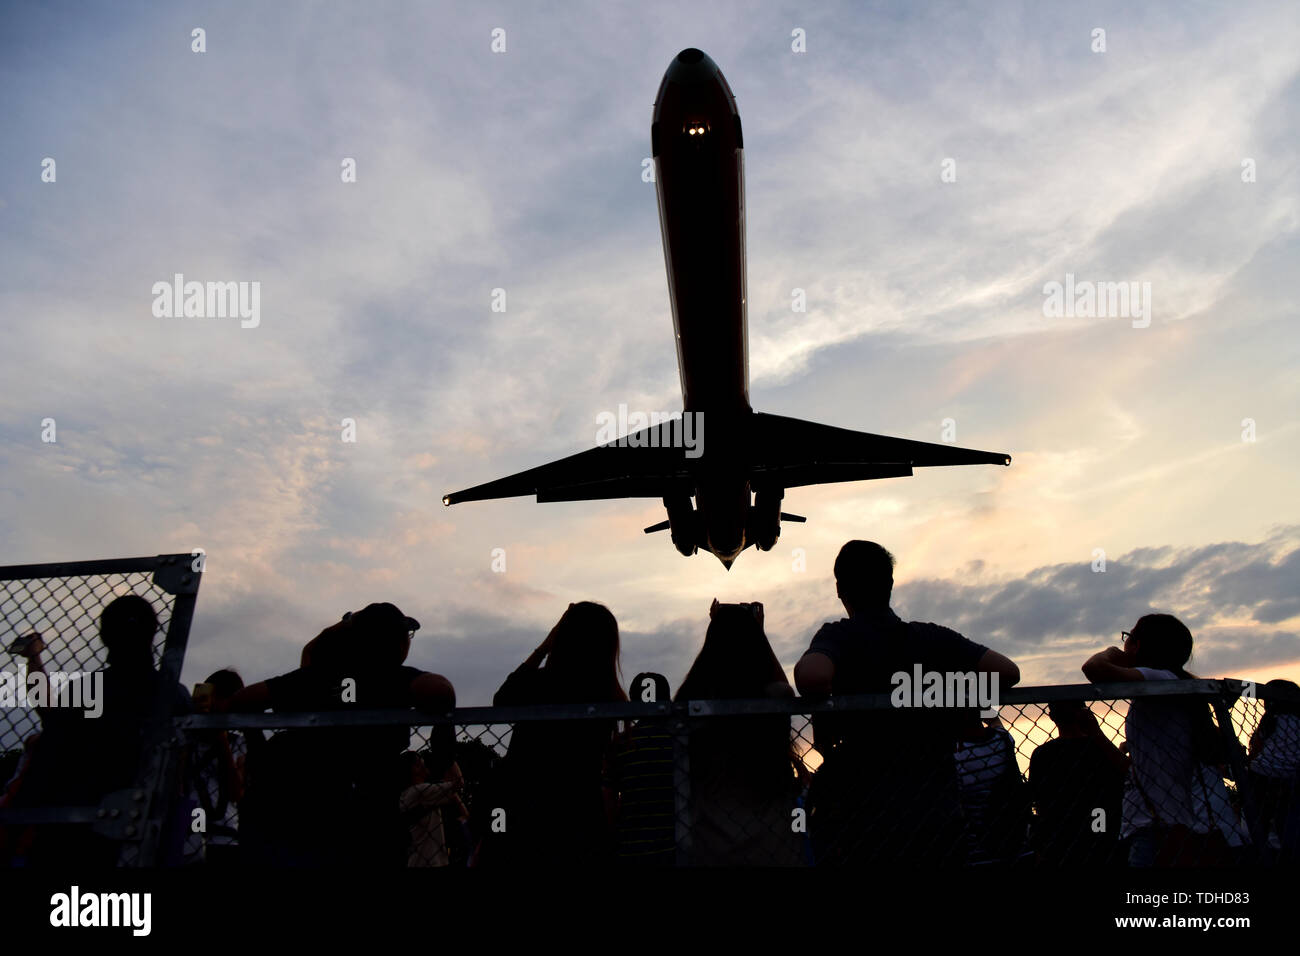 Taipei's Taiwan. 16th June, 2019. Local residents and tourists observe a passing airplane near Taipei Songshan Airport in Taipei, southeast China's Taiwan, June 16, 2019. Credit: Zhu Xiang/Xinhua/Alamy Live News Stock Photo